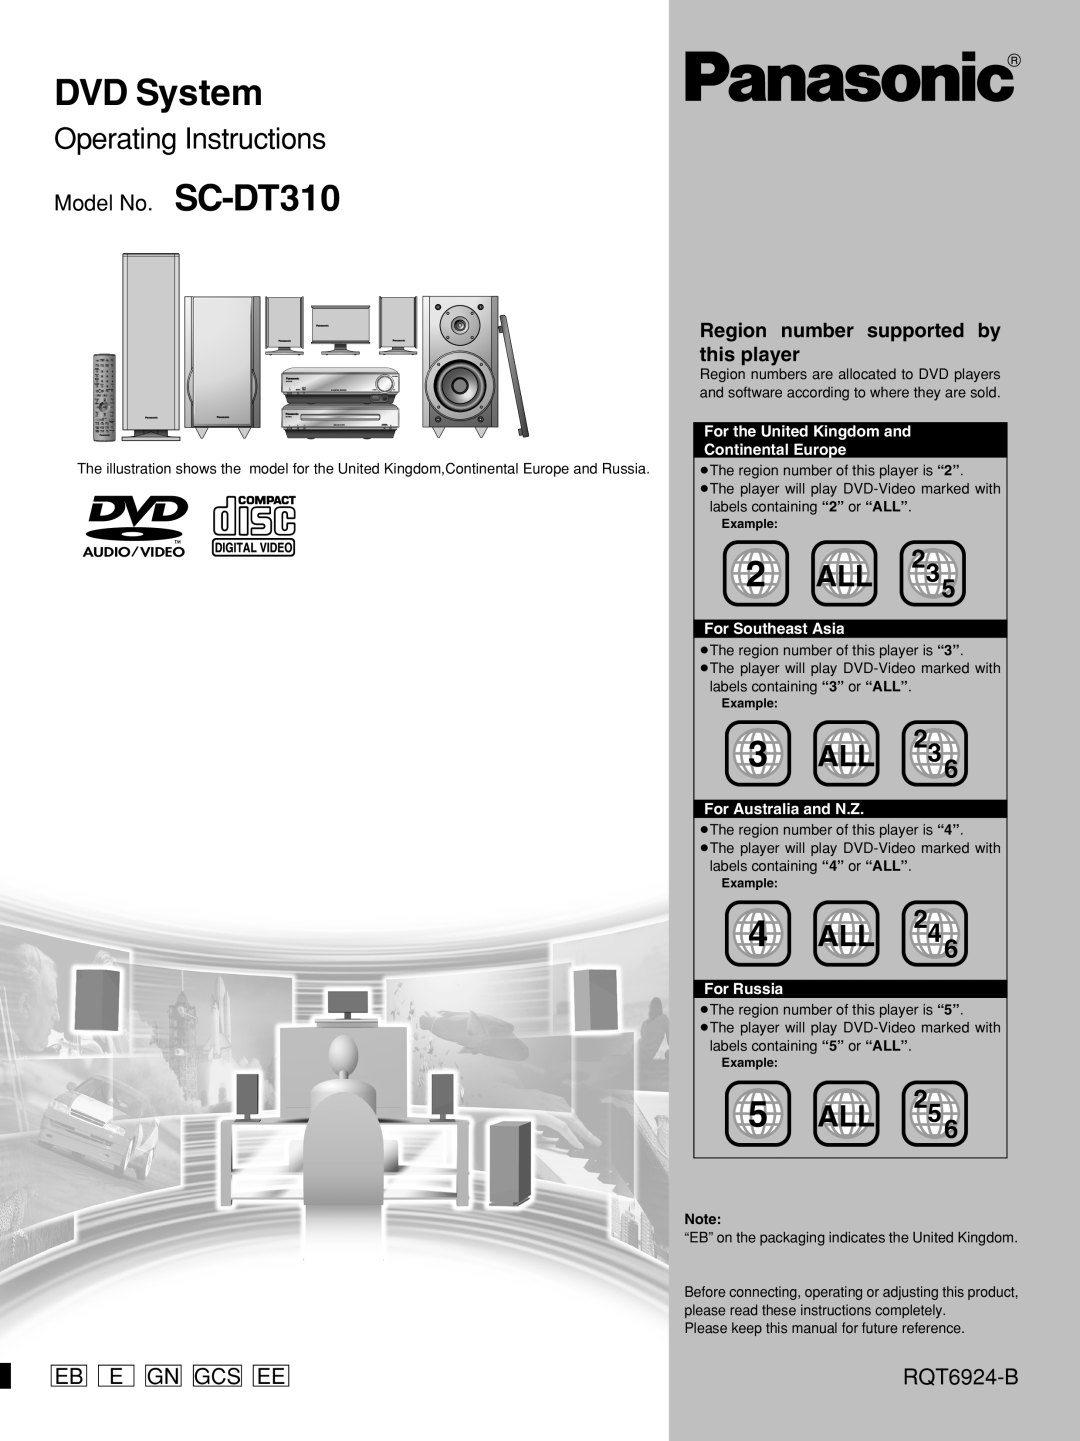 Panasonic manual Model No. SC-DT310, Eb E Gn Gcs Ee, RQT6924-B, Region number supported by this player, DVD System 